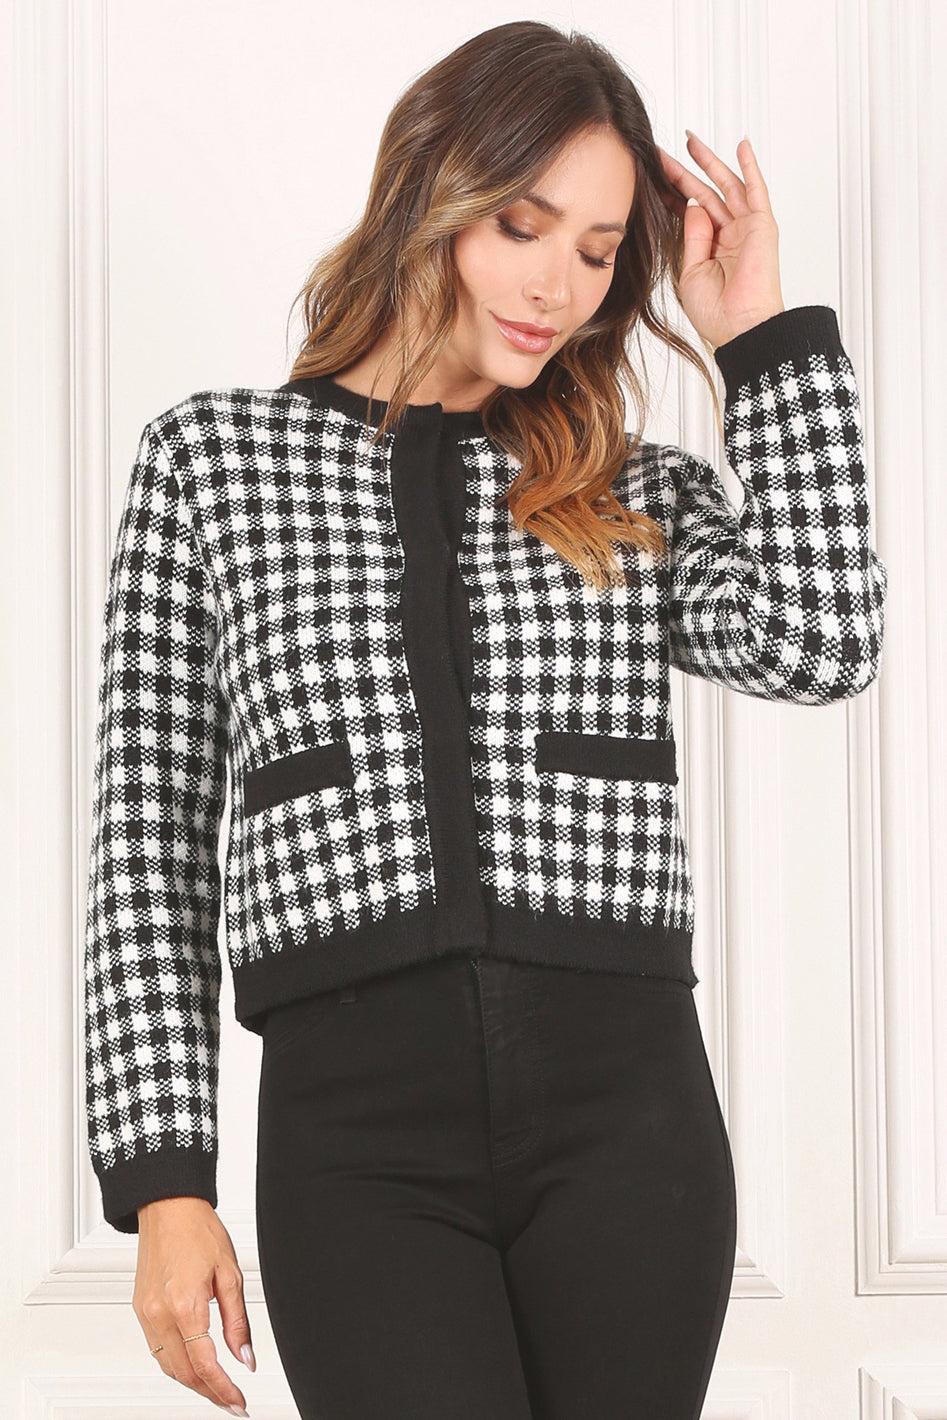 Black check knitted jacket - Azoroh